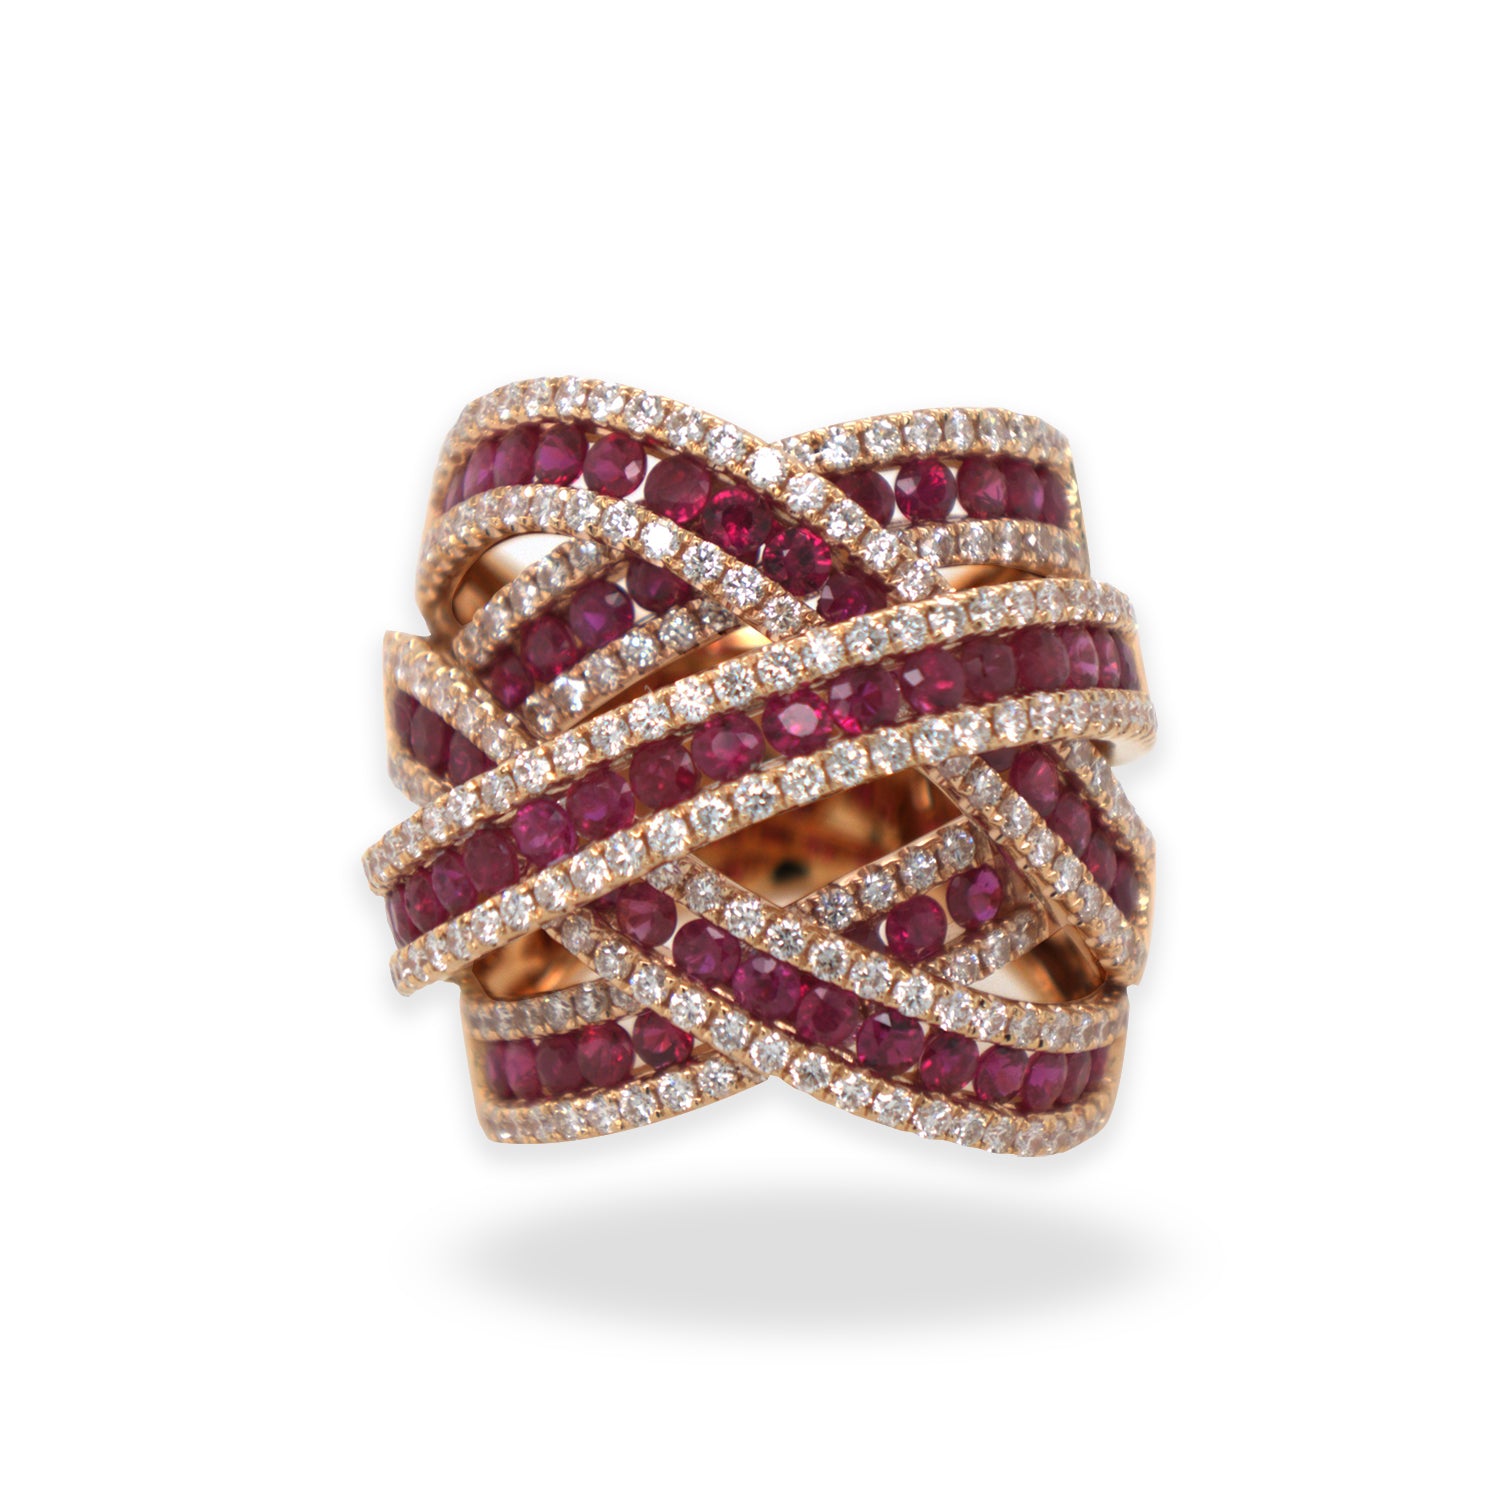 Luxury Gold, Diamond, Ruby, White Gold and Rose Gold Rings